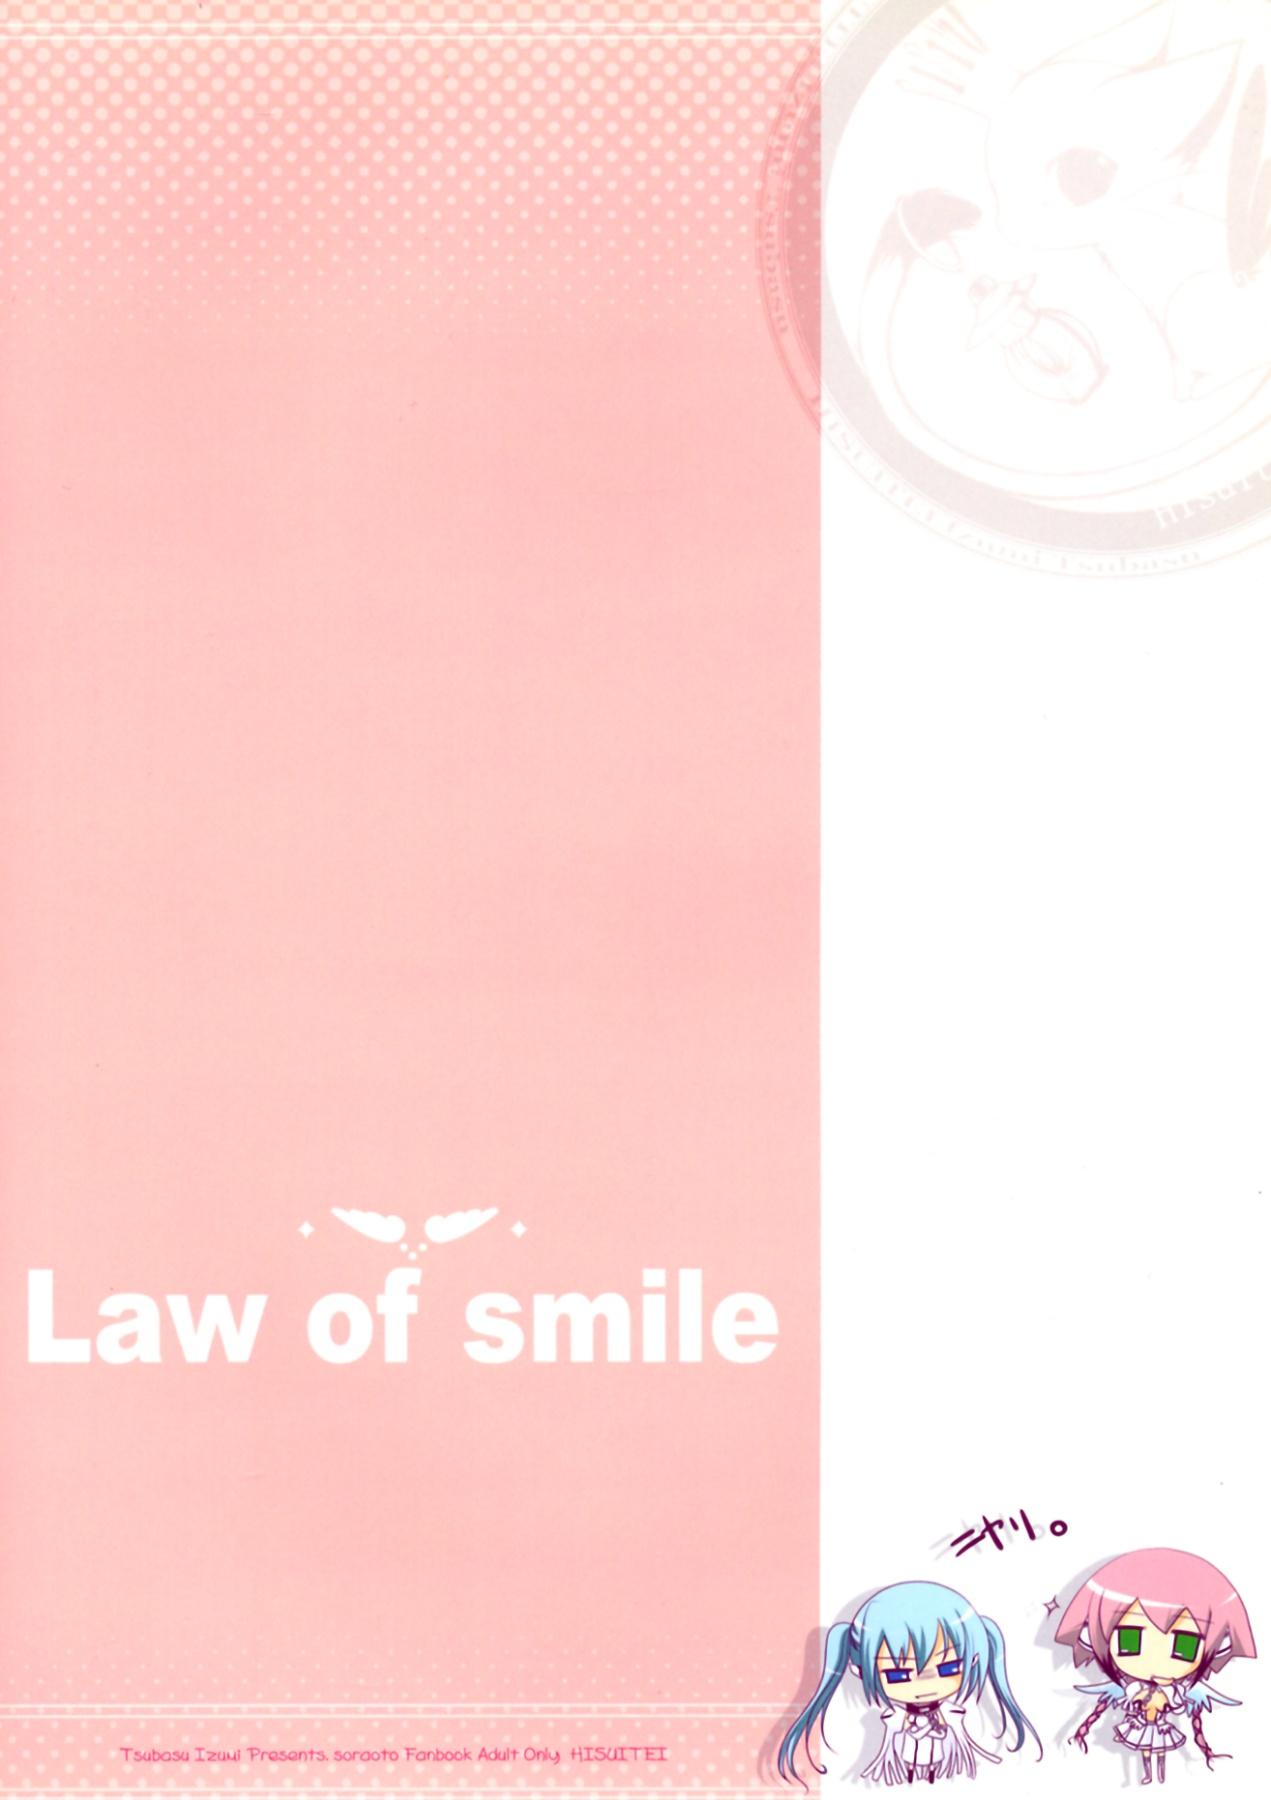 Law of smile 1